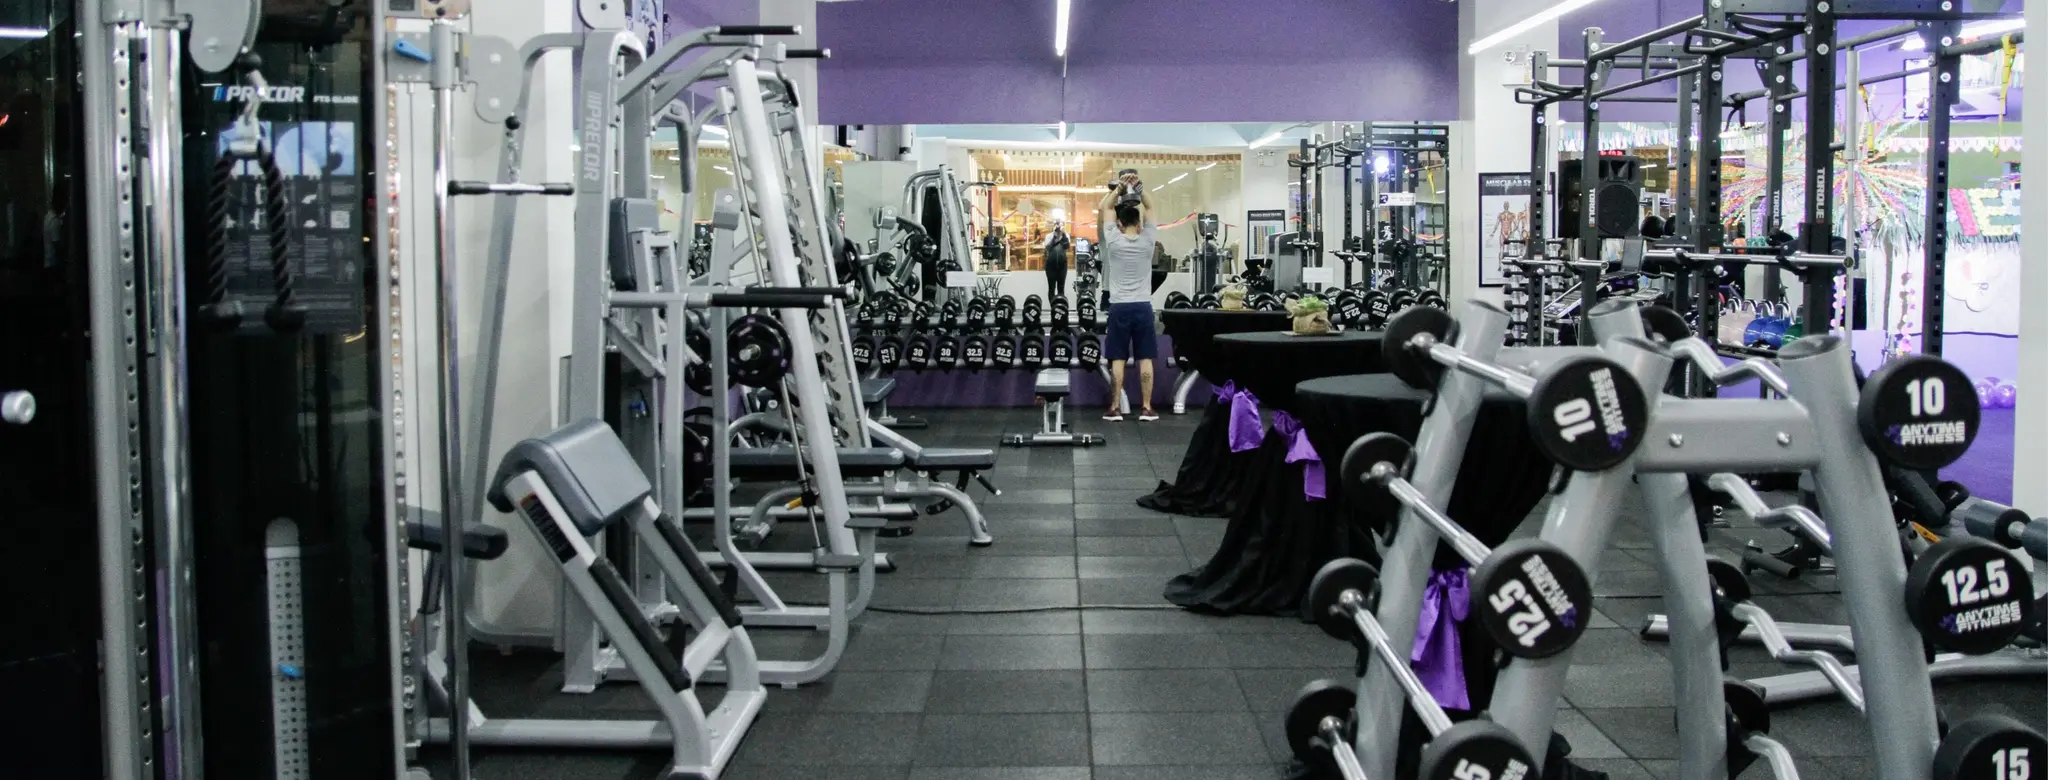 Gym with various machines and weights